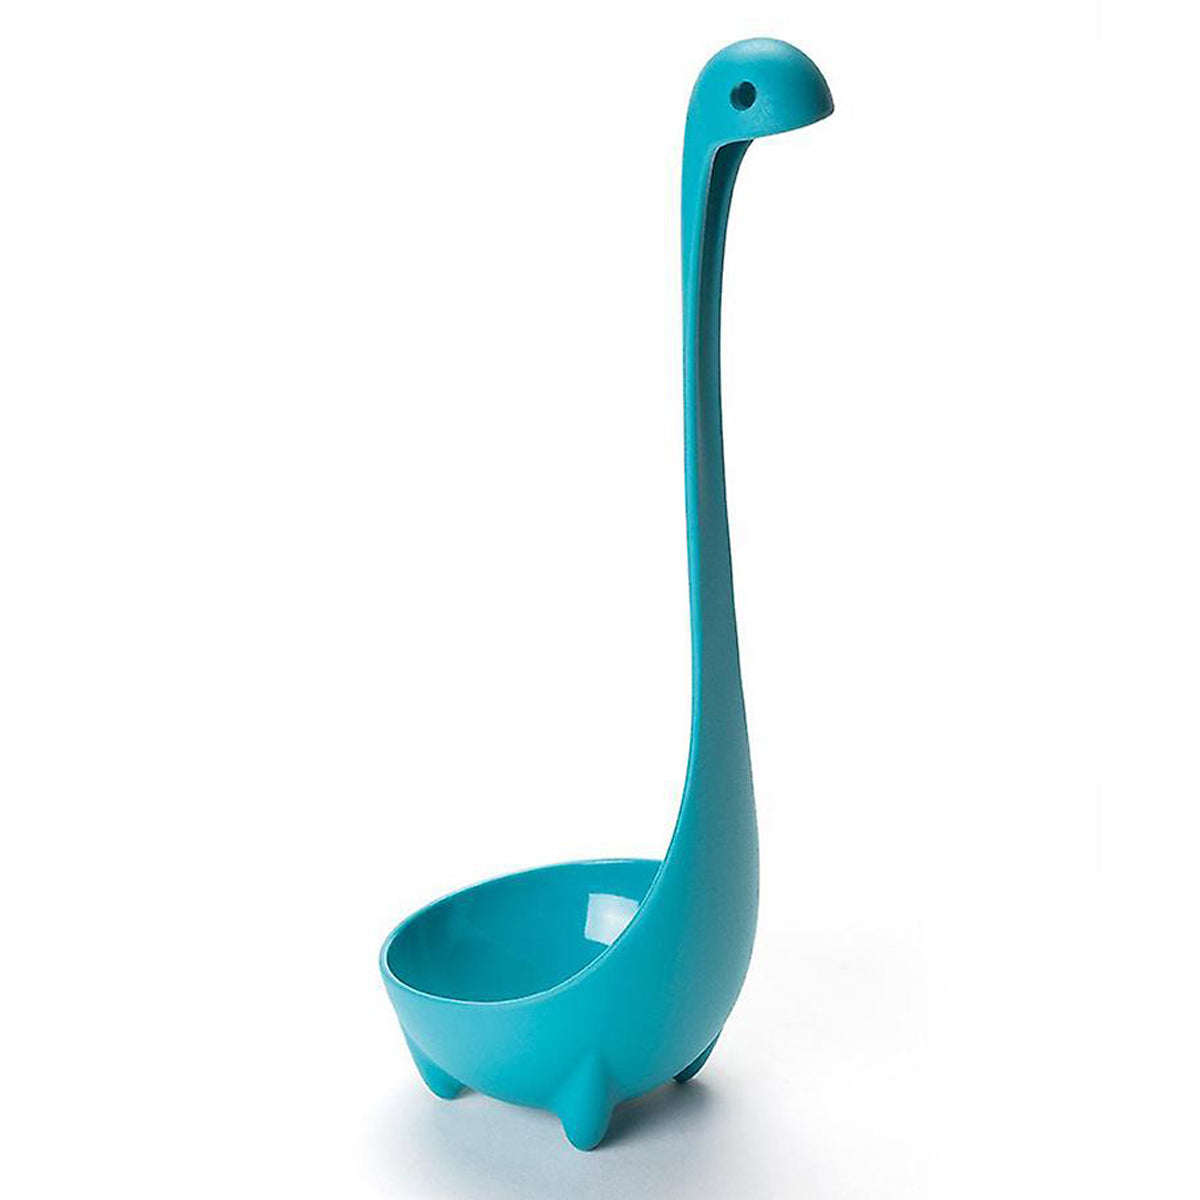 9.65" Loch Ness Monster Ladle, Teal - Stand Up Soup Ladle, Heat Resistant